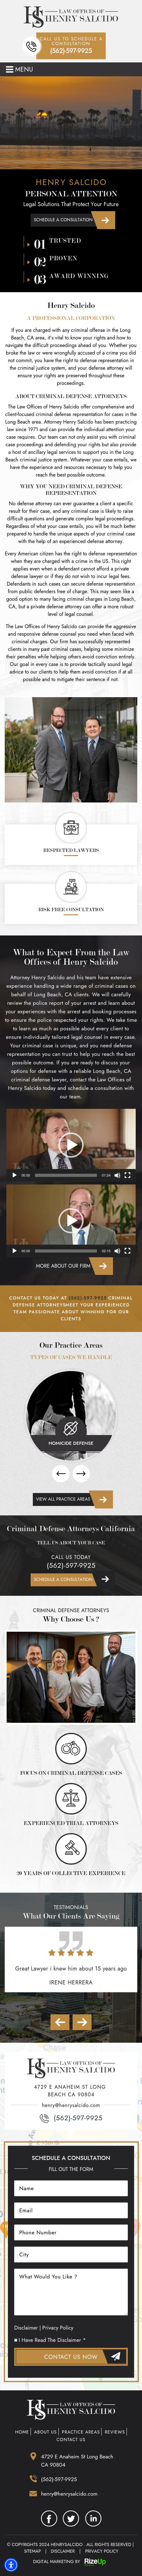 Law Offices of Henry Salcido - Long Beach CA Lawyers